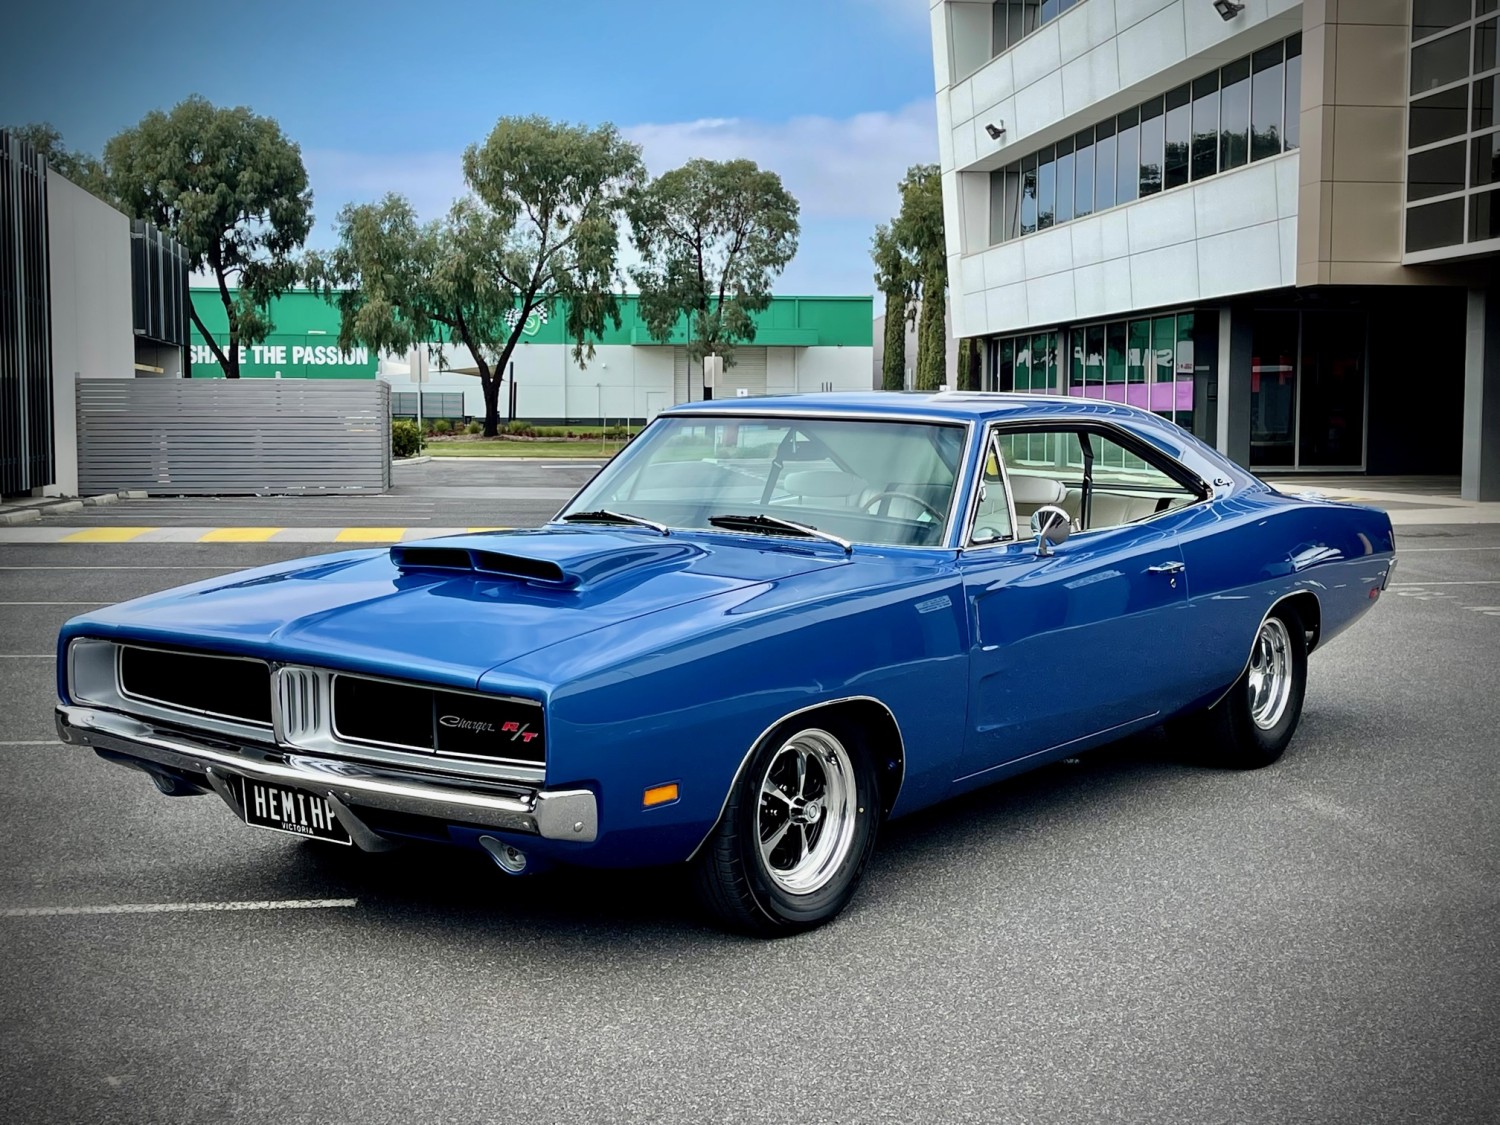 1969 Dodge CHARGER - maz351 - Shannons Club